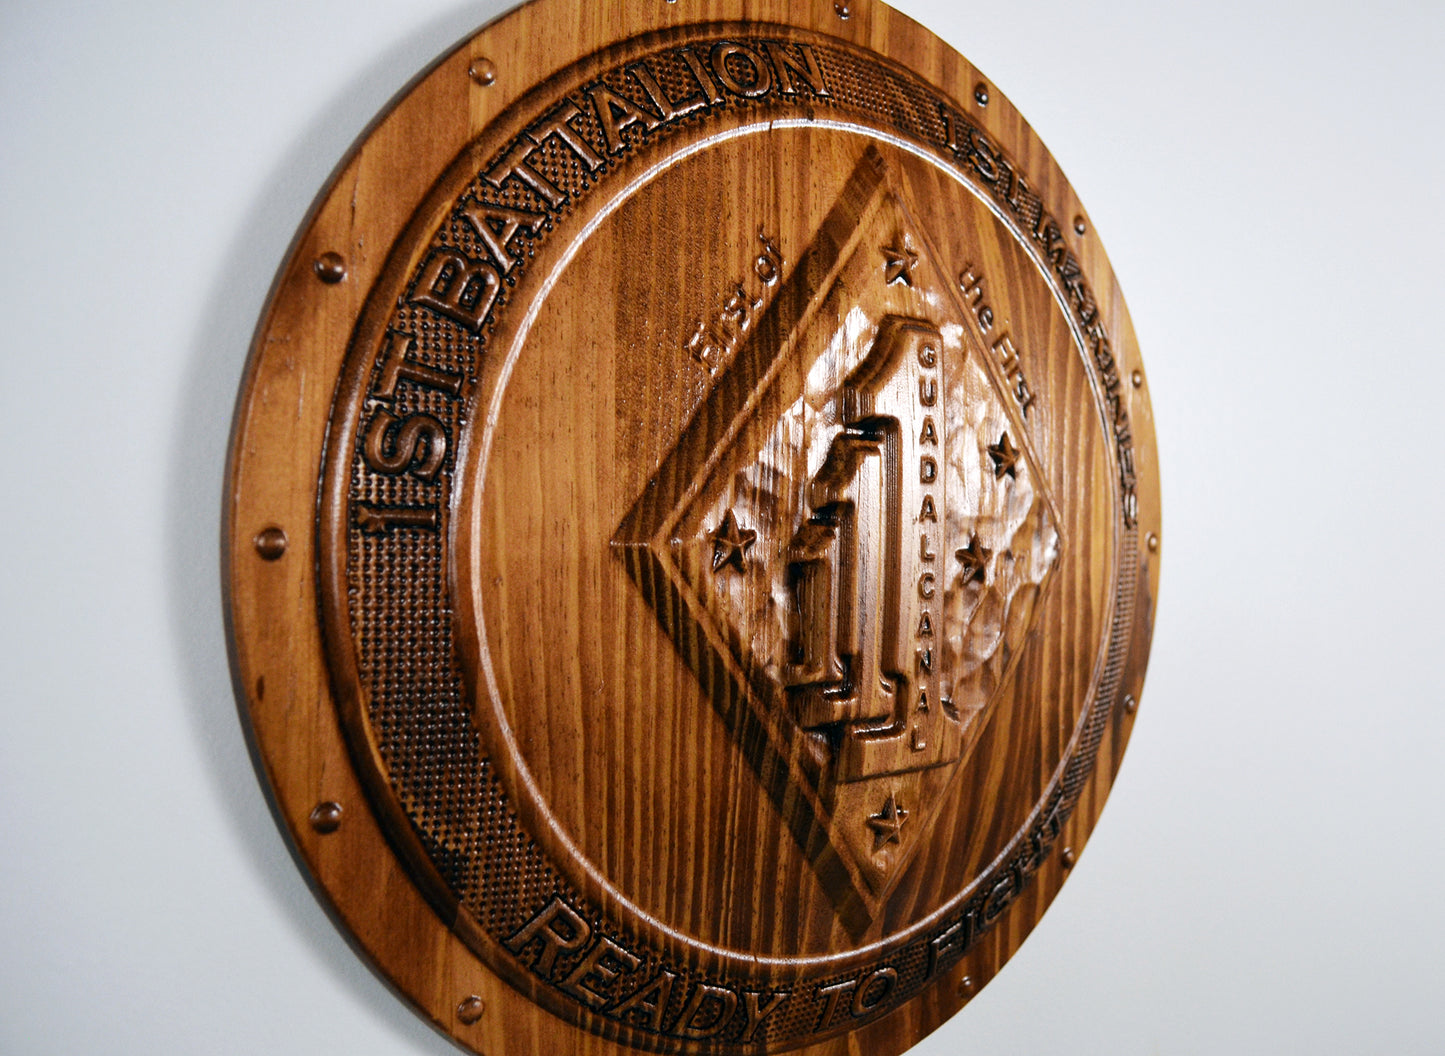 USMC 1st Battalion 1st Marines, 1st of the 1st Marine Corps, 3d wood carving, military plaque